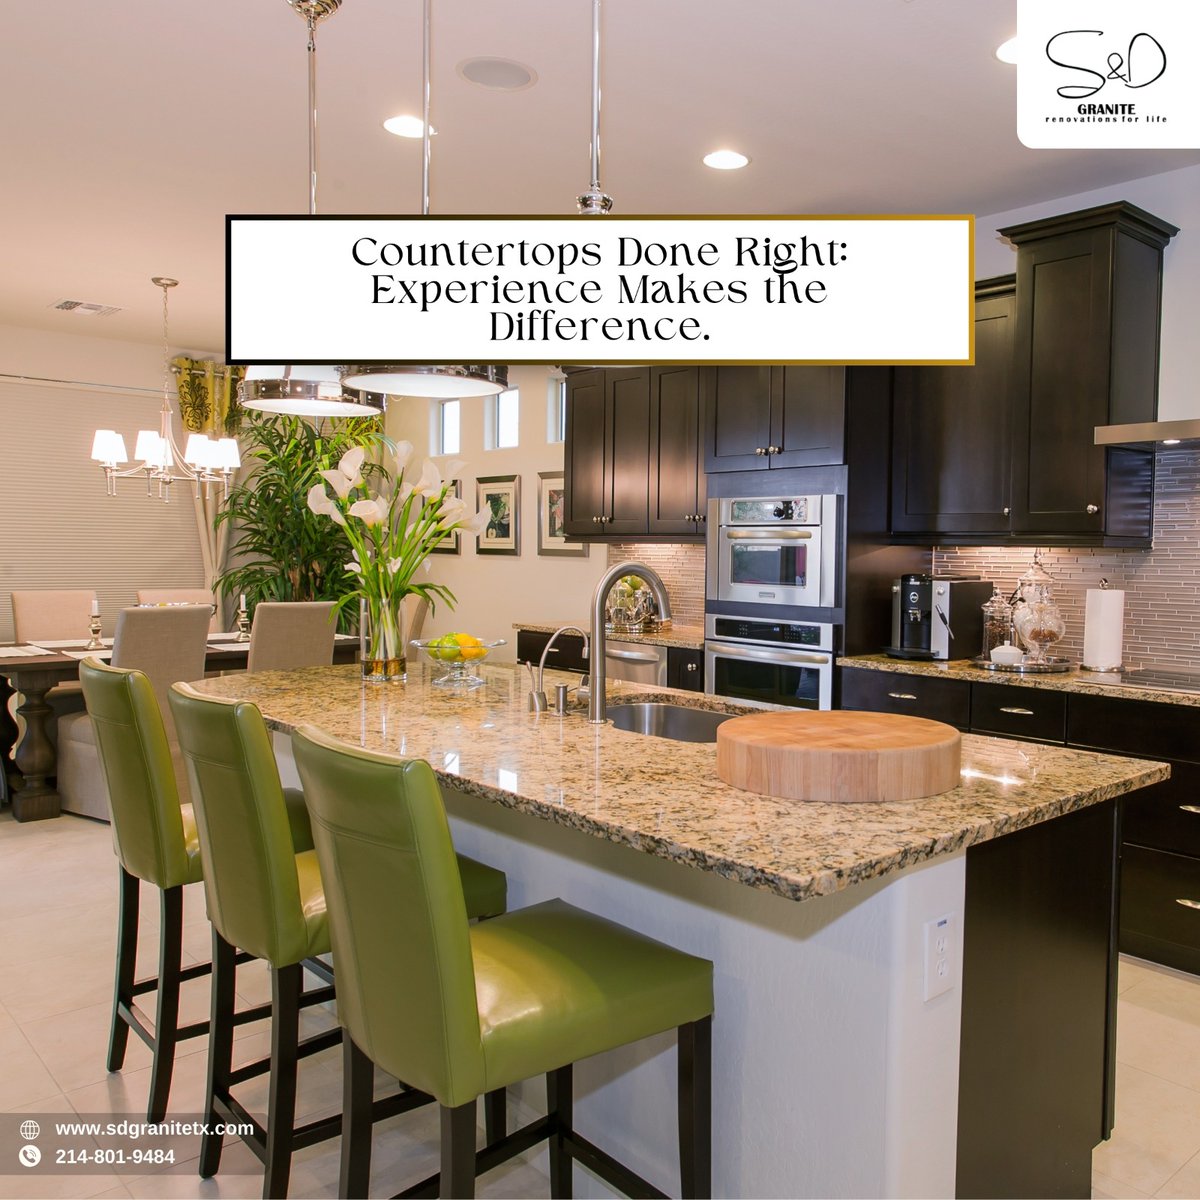 Countertops Done Right: Experience Makes the Difference.

Contact us for more:
Visit sdgranitetx.com📍
Call - 📞214-801-9484

#granite #marblecountertops #quartzitecountertops #granitecounters #granitecountertops #marble #tiles #kitchendecor #kitchenideas